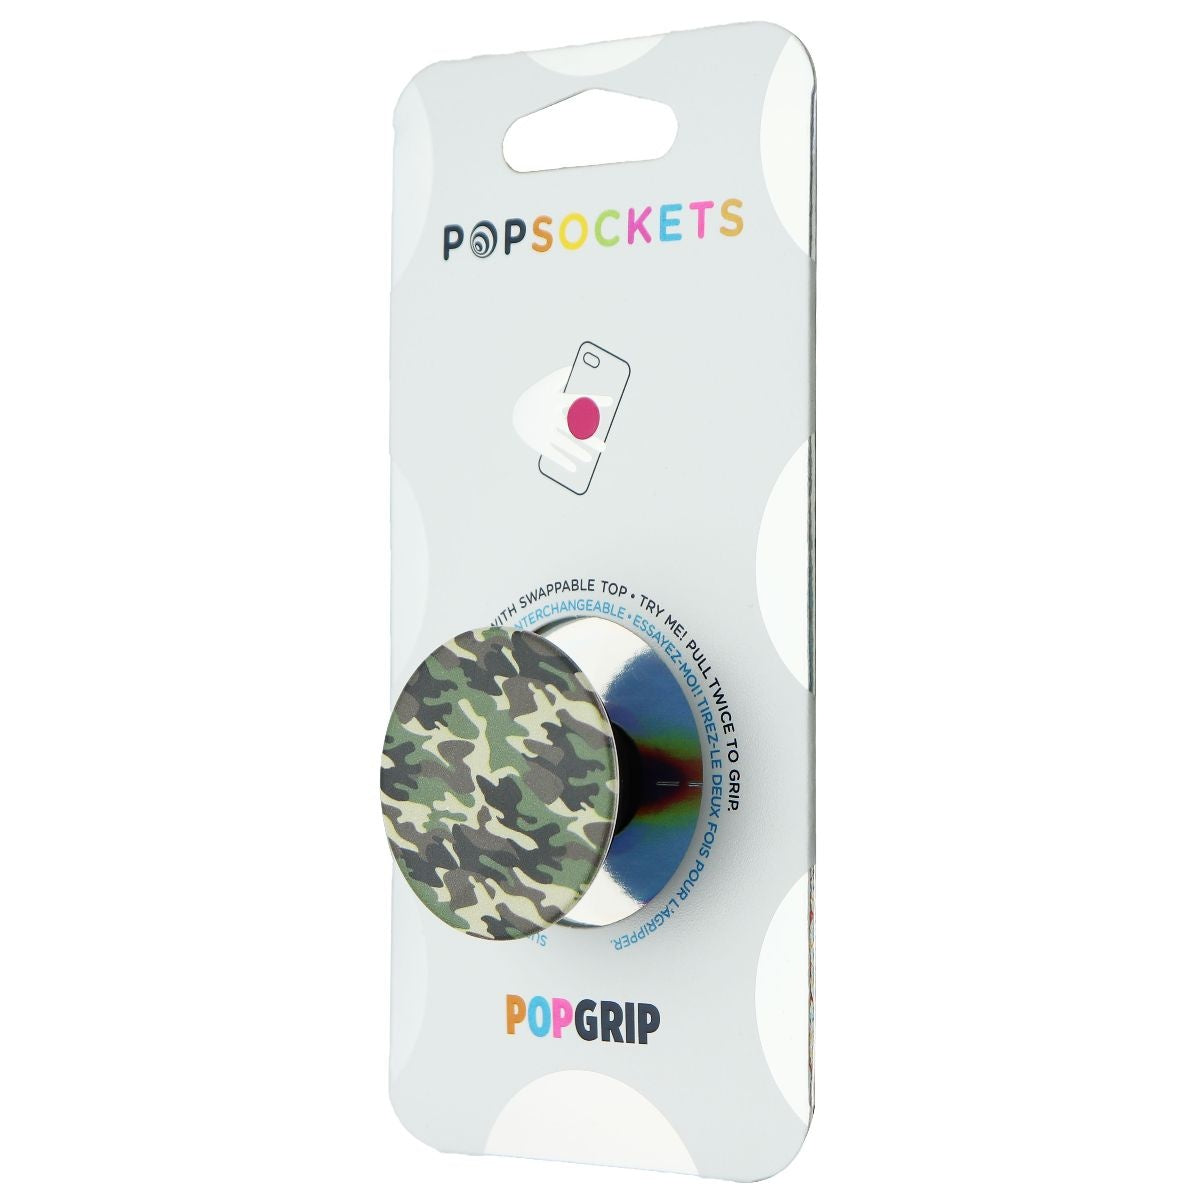 PopSockets PopGrip Expanding Stand and Grip with a Swappable Top - Woodland Camo